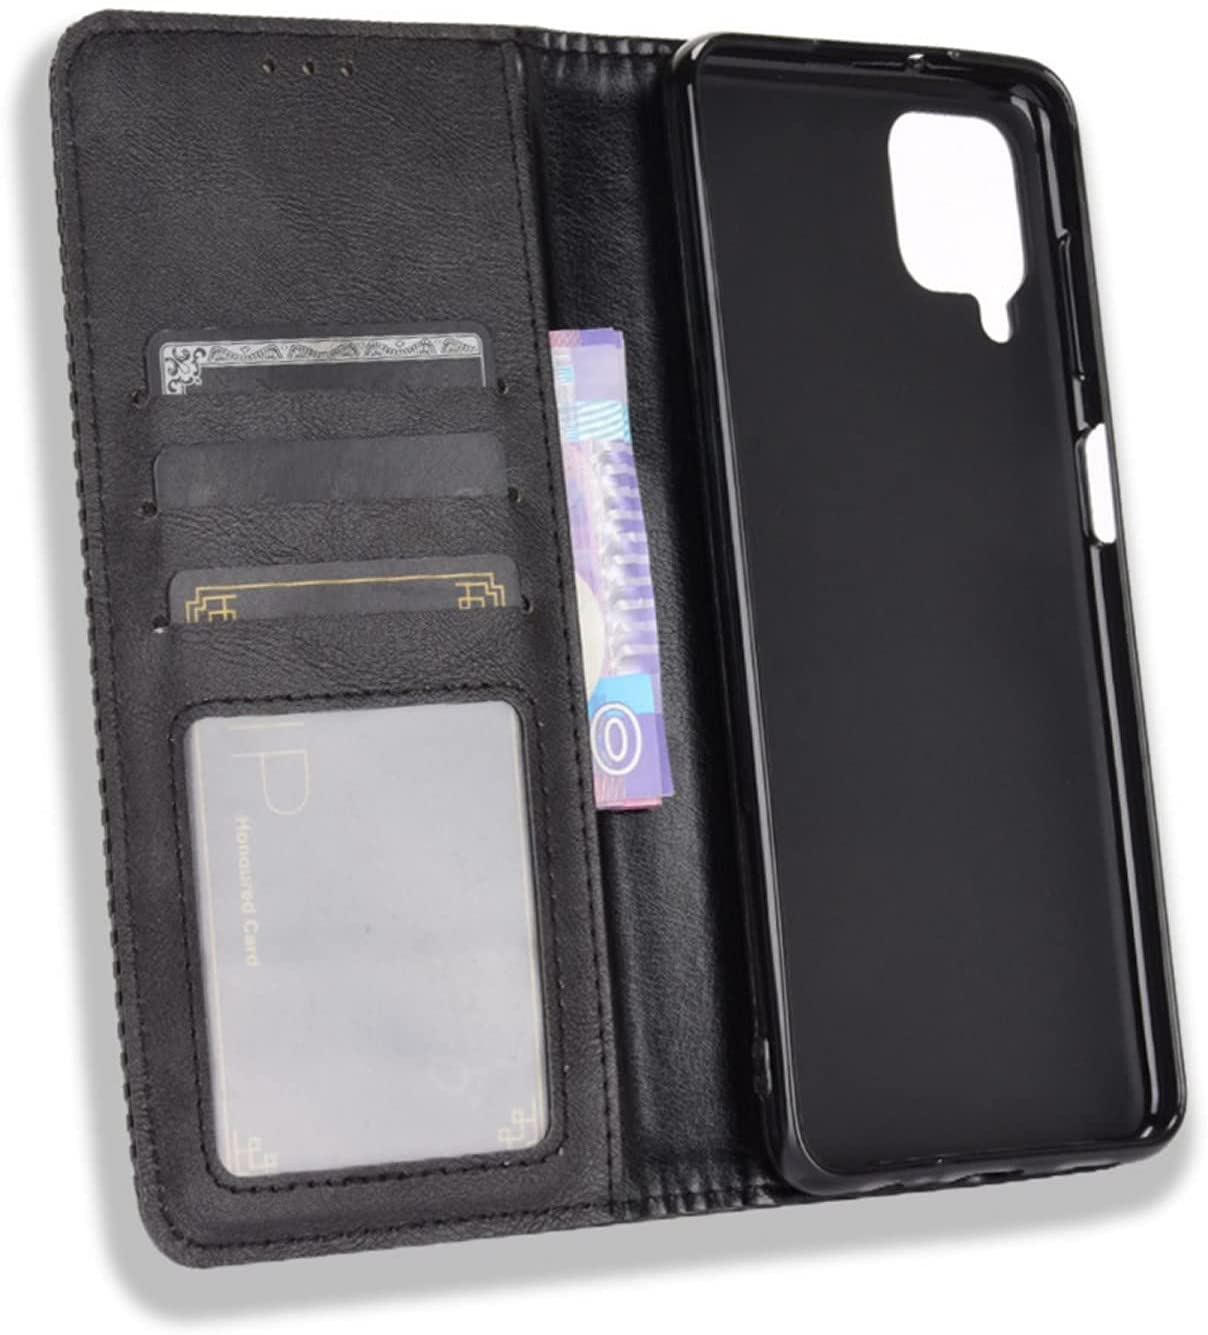 Samsung Galaxy M42 wallet flip cover case with soft tpu inner cover 